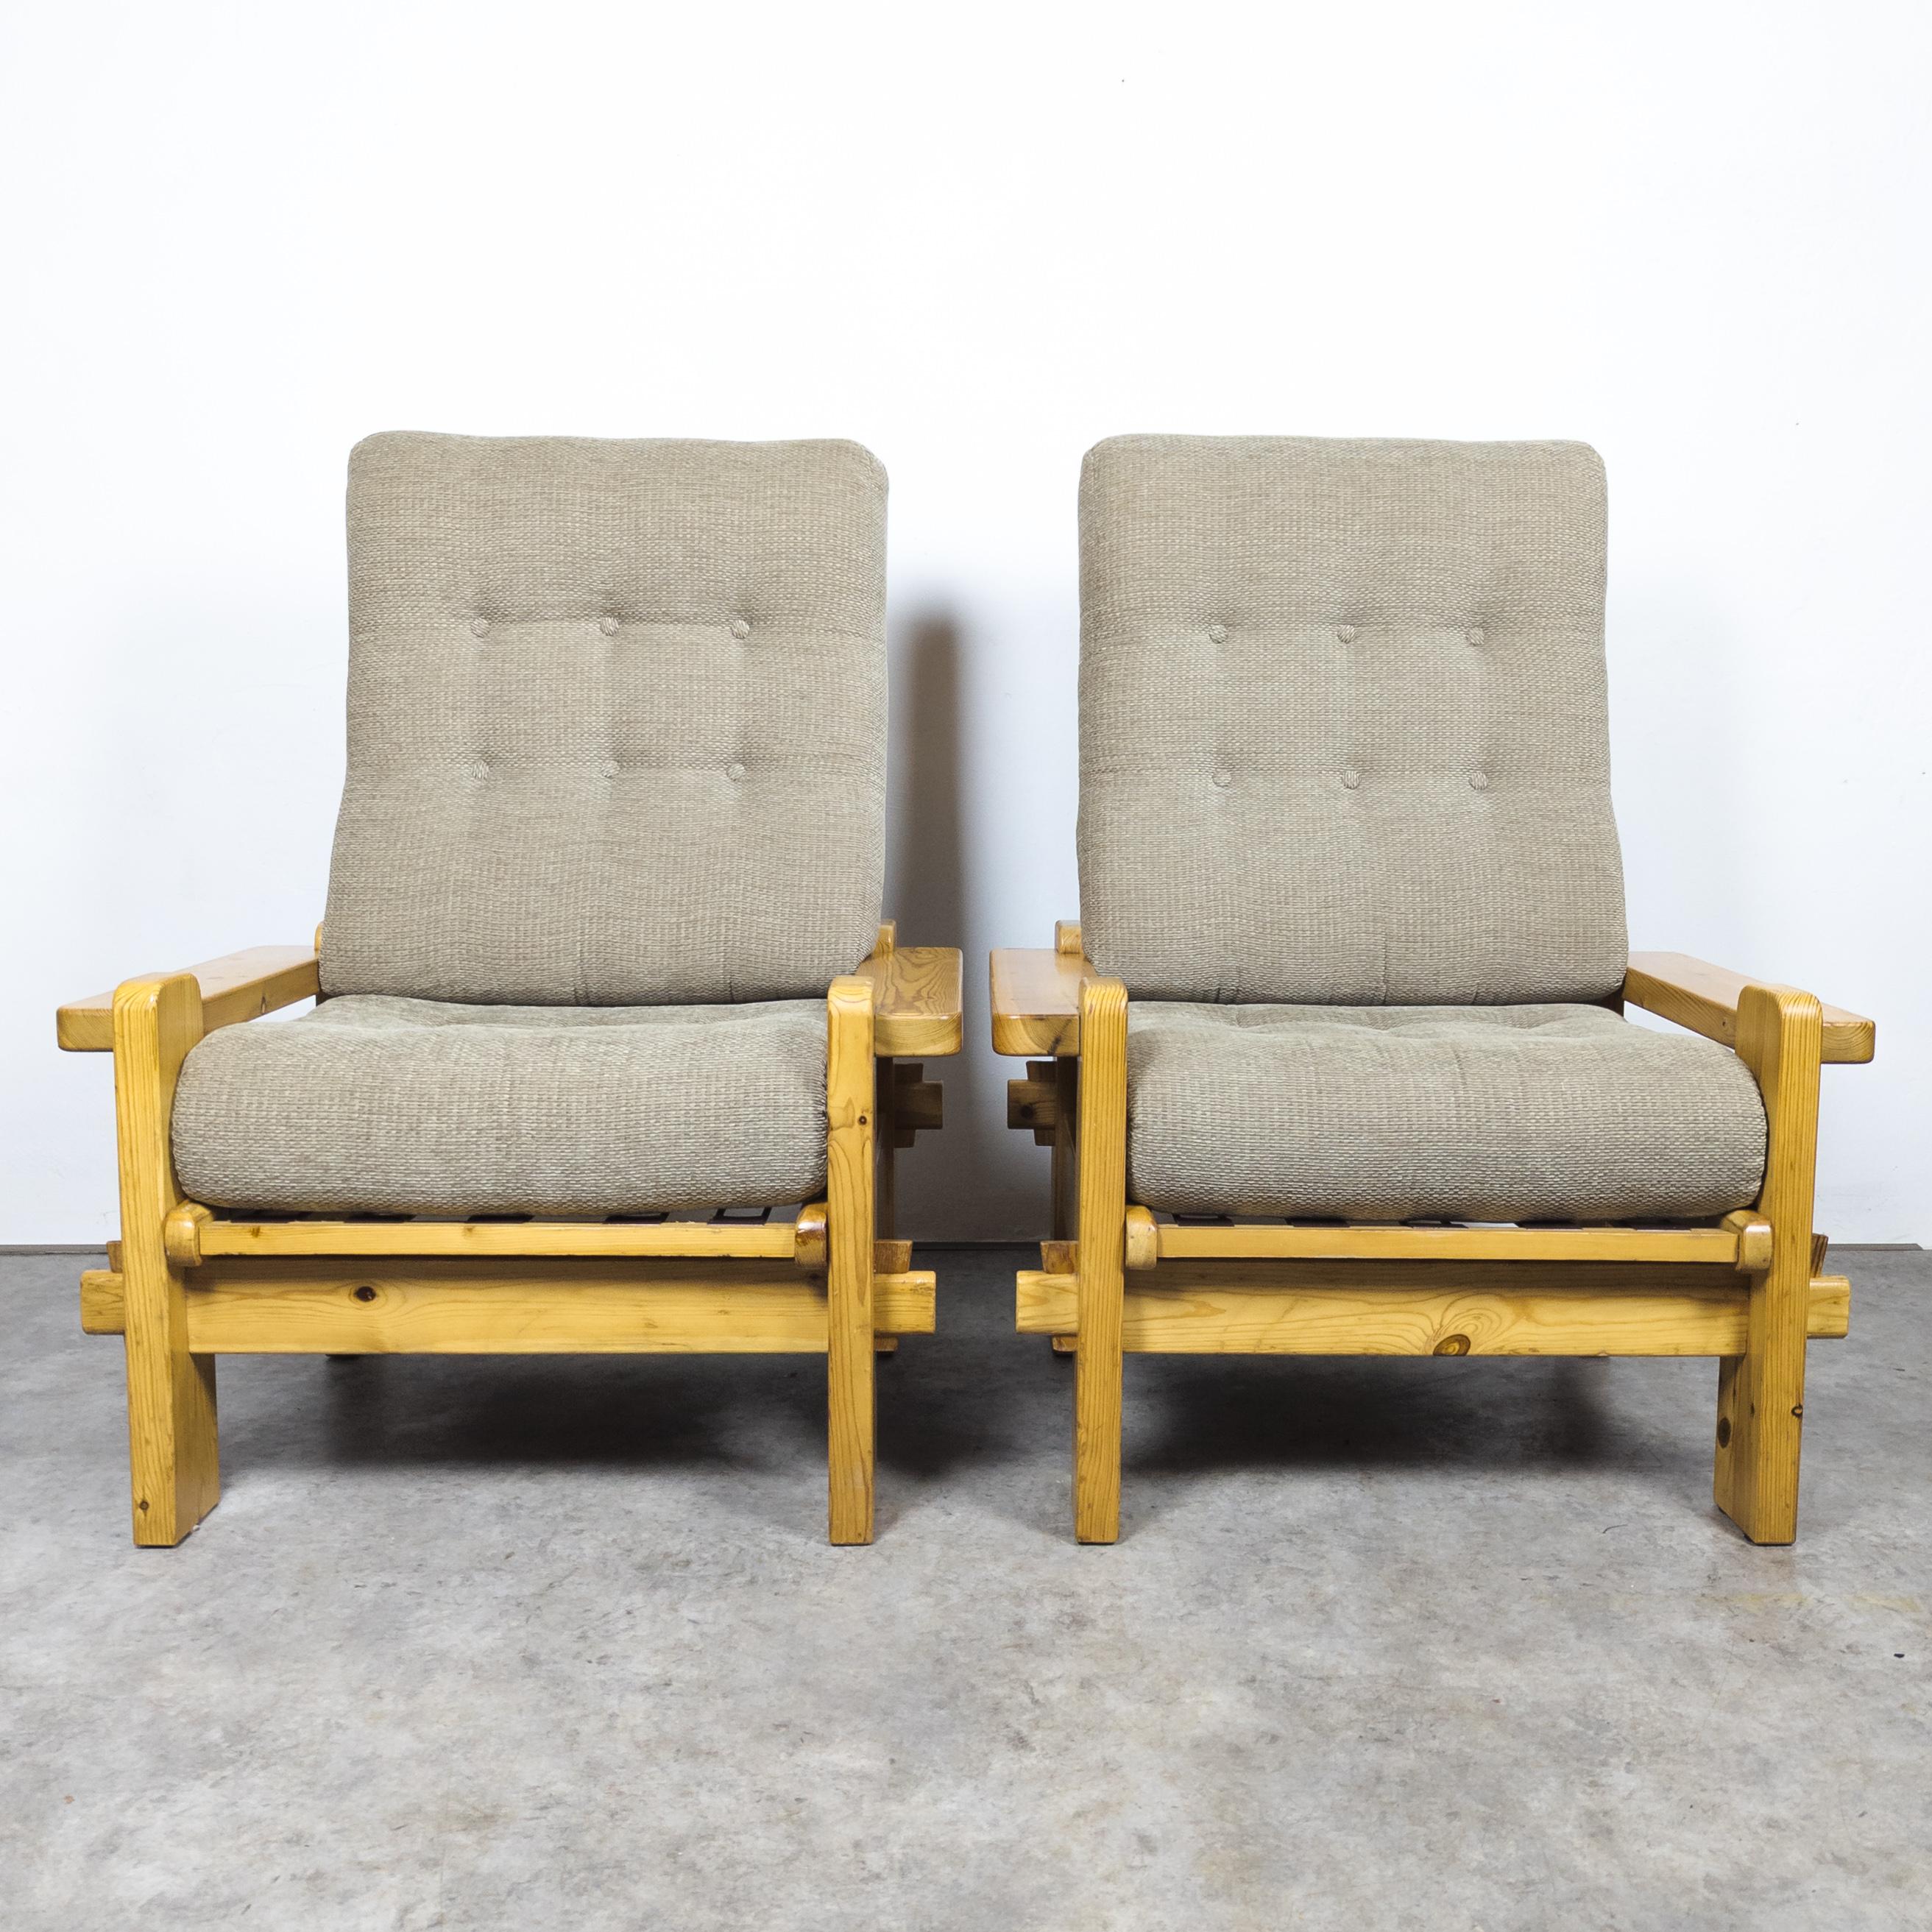 Designed by Yngve Ekström for Swedese. Manufactured in Sweden in the 1970s. Solid pine wood frame in very good original condition with delightful patina. Structurally sound. Recently reupholstered with a fabric matching the original. New cushions